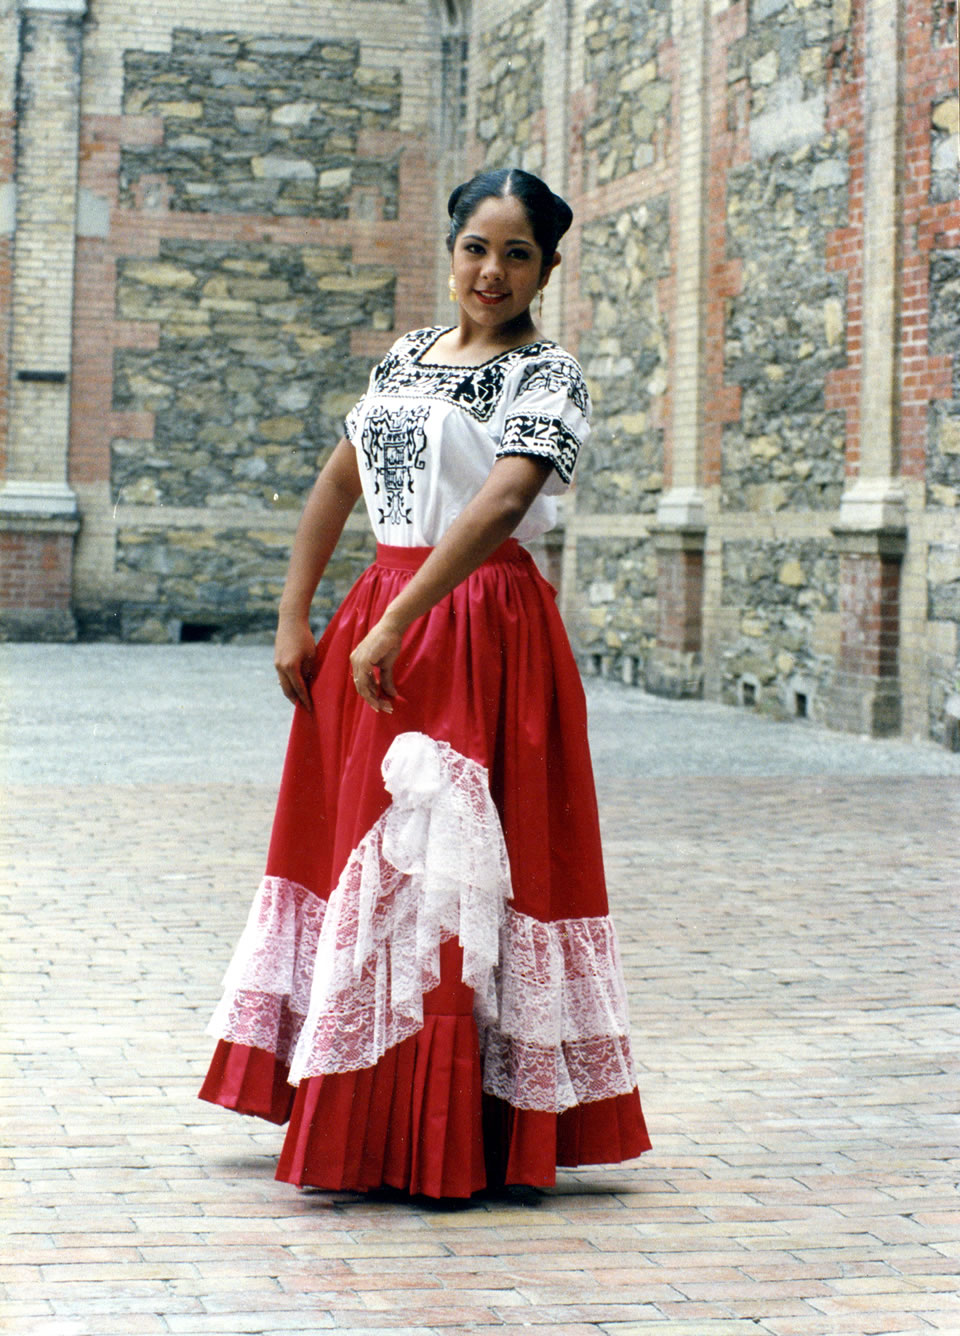 Typical Mexican Clothing